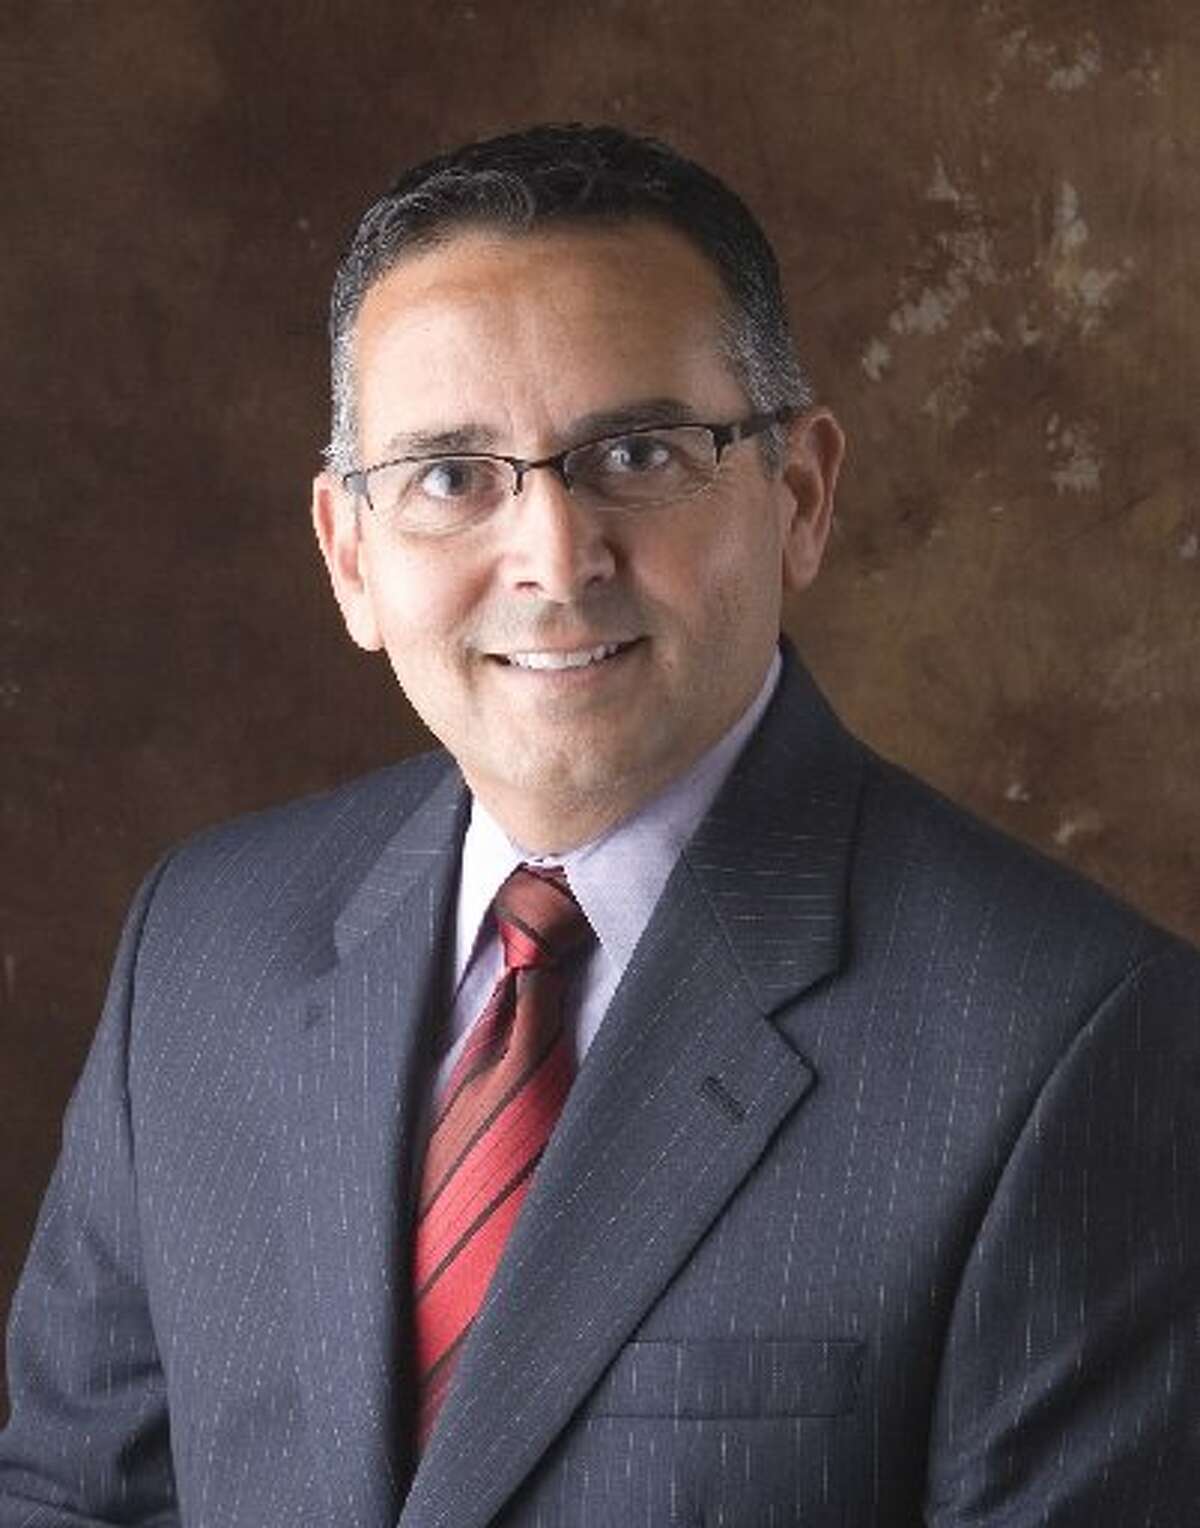 Ramiro Fonseca is seeking the HISD District 2 board seat for the second time.